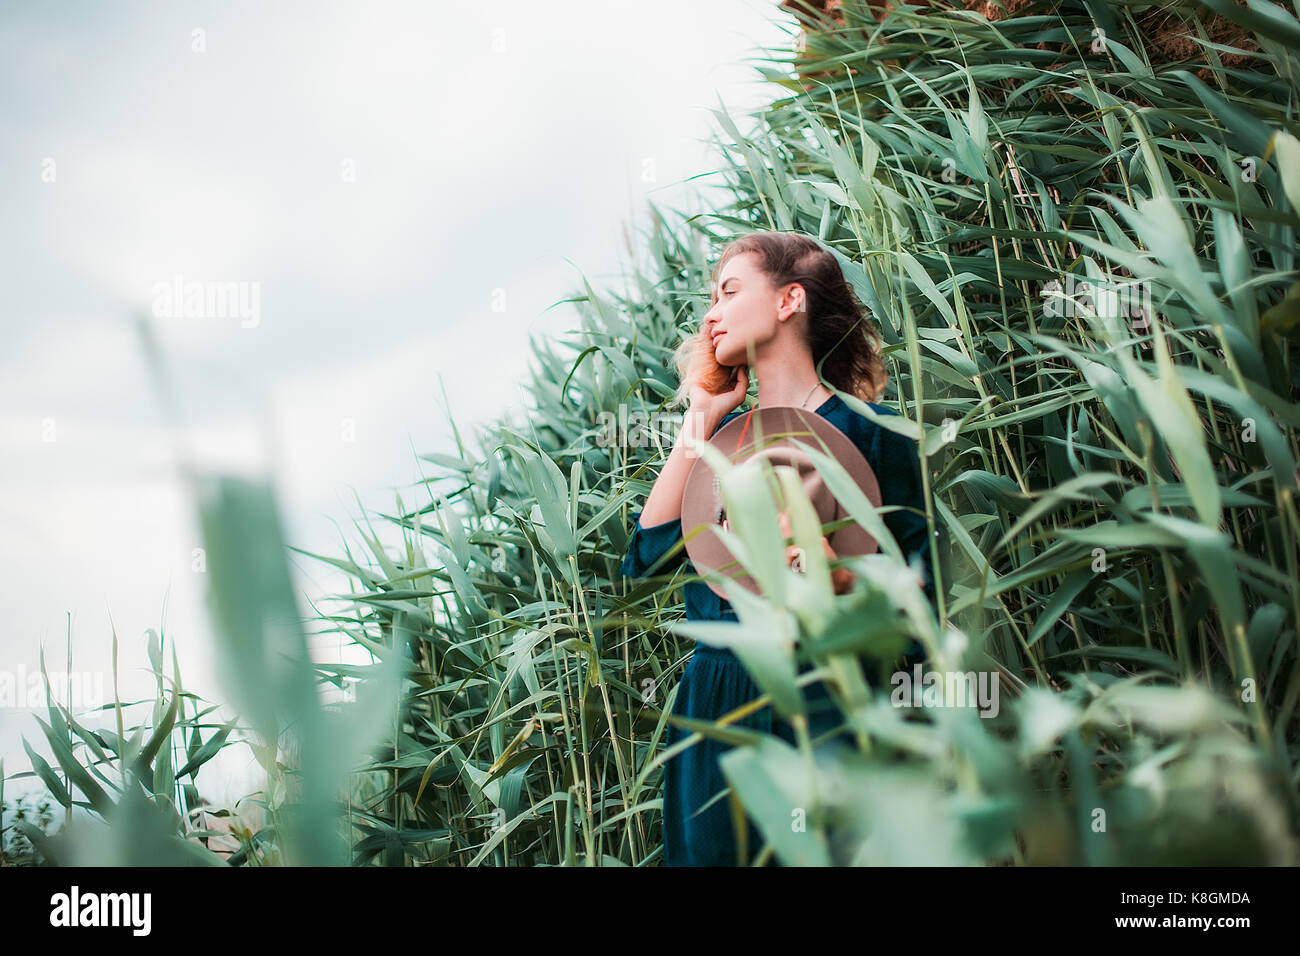 Mid adult woman beside long grass, touching hair, breathing in fresh air Stock Photo